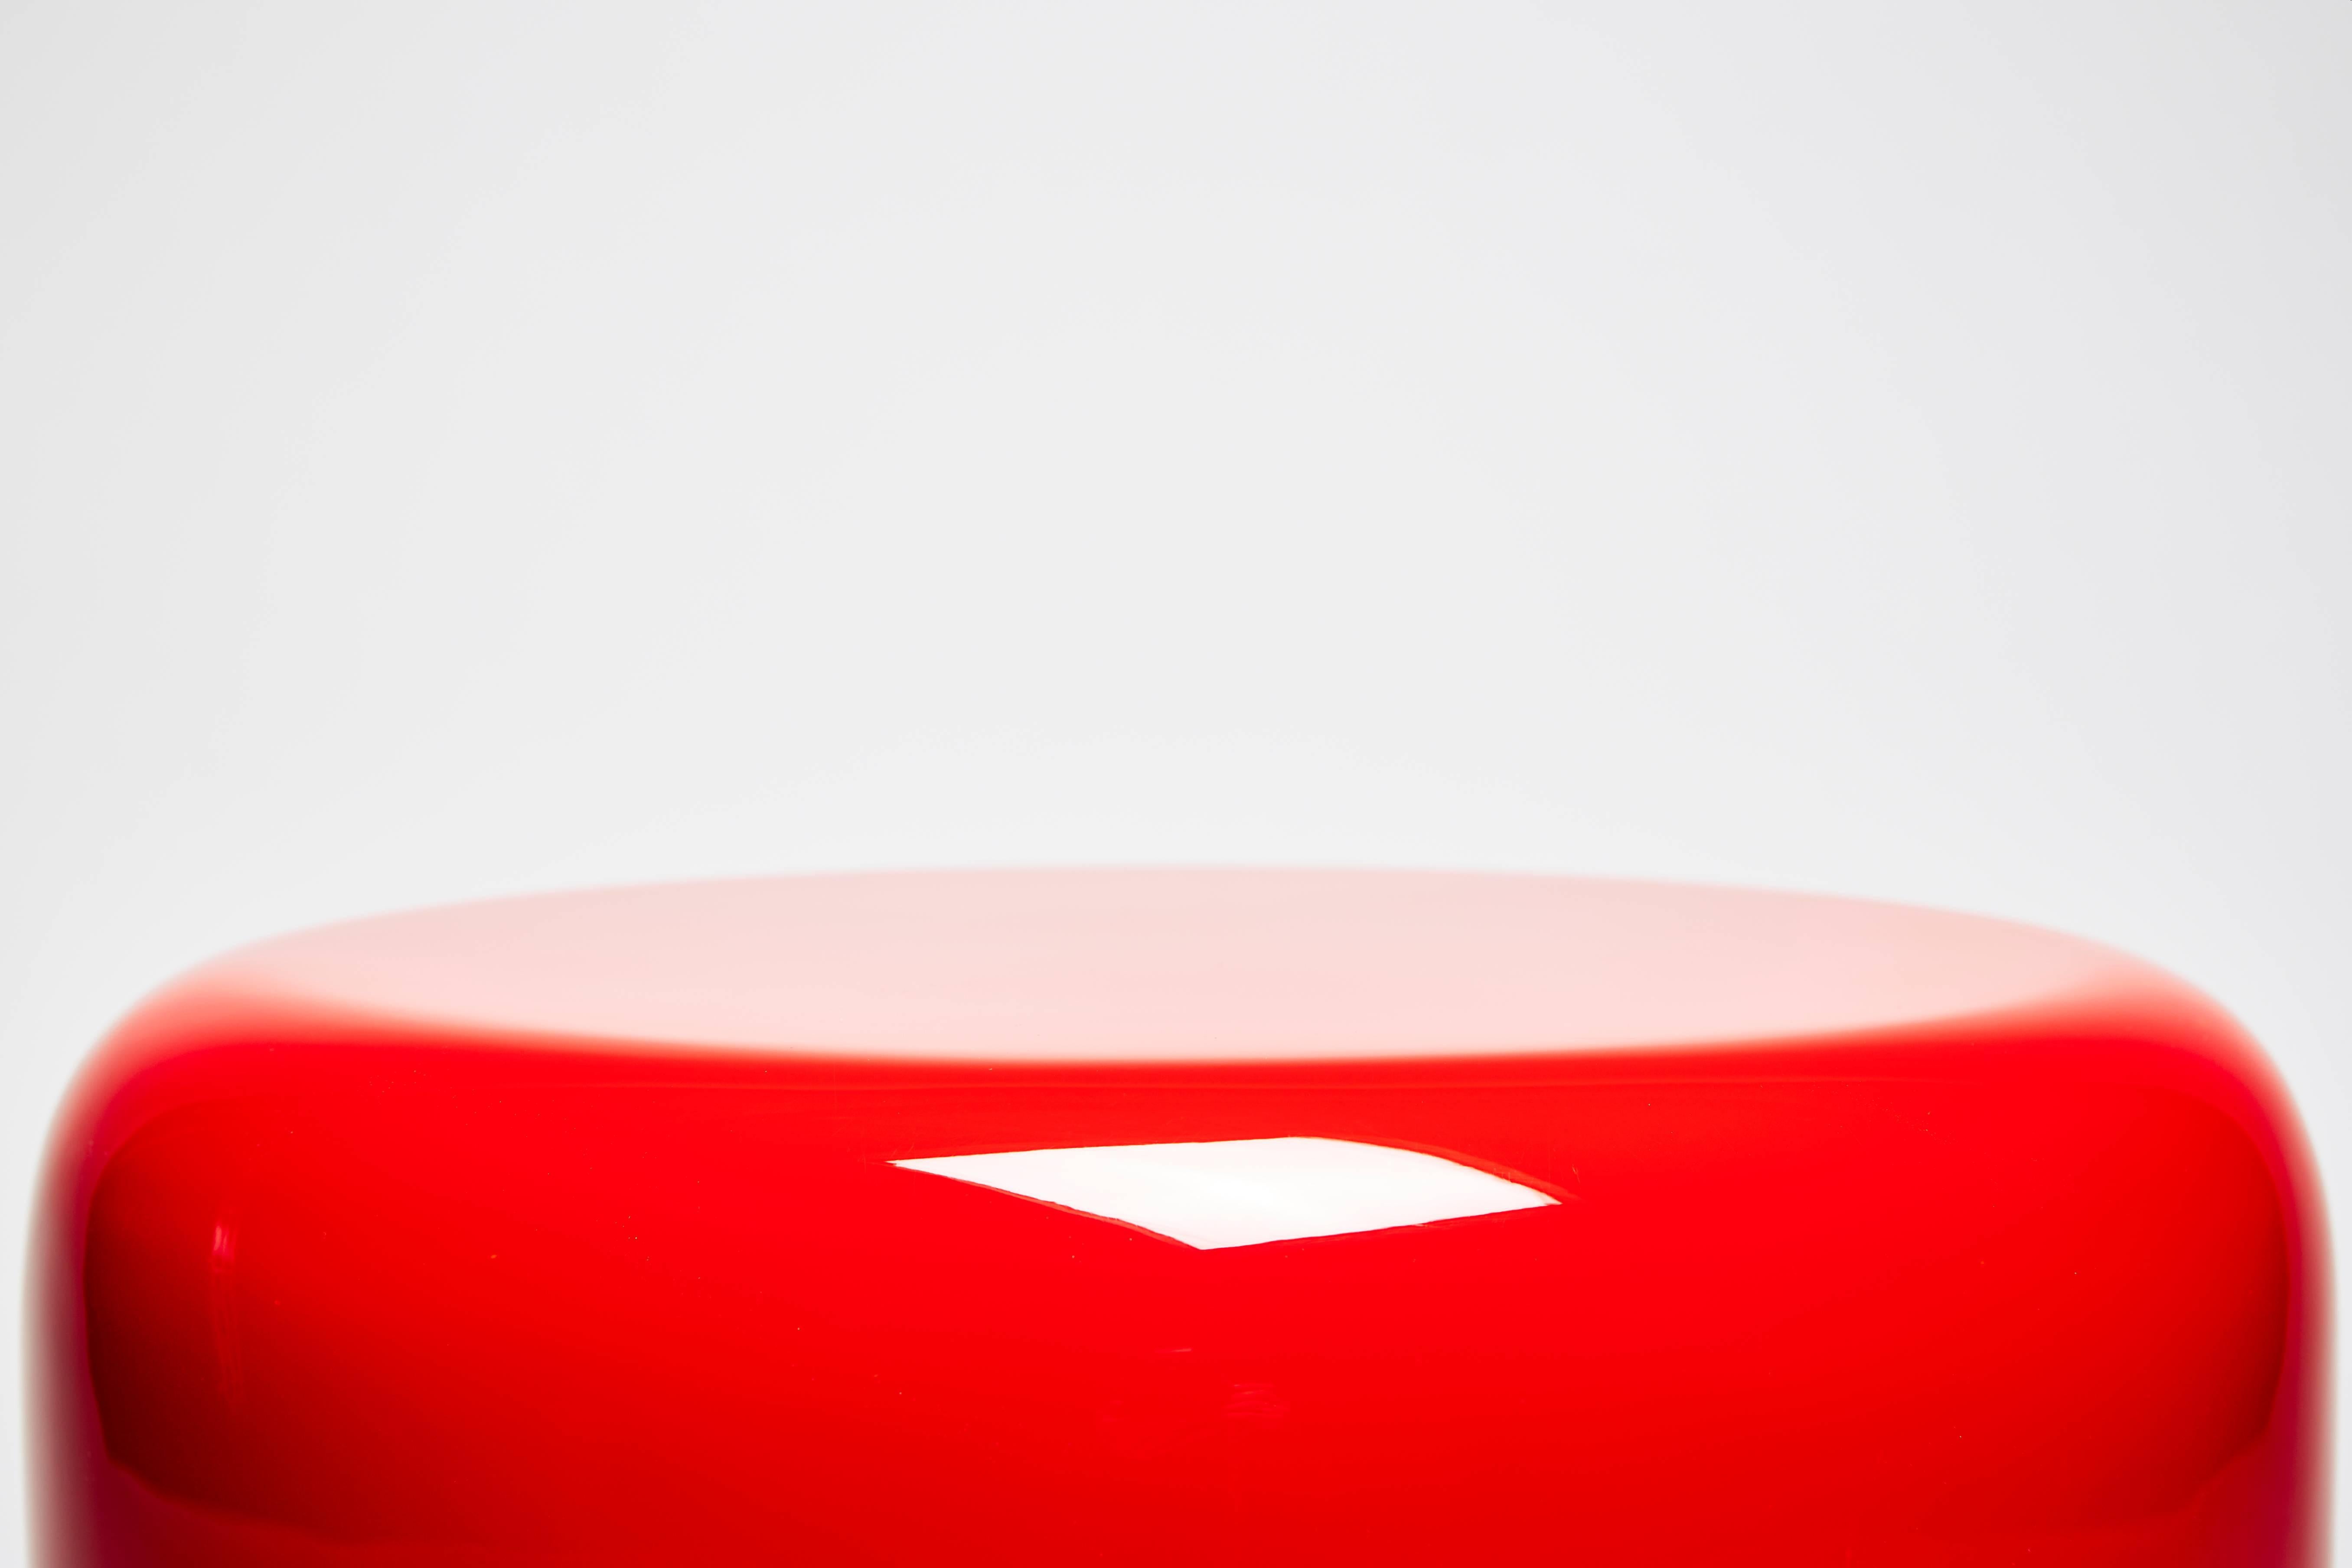 Vietnamese Side Table, Iconic Red DOT by Reda Amalou Design, 2017 - Glossy or mate lacquer  For Sale